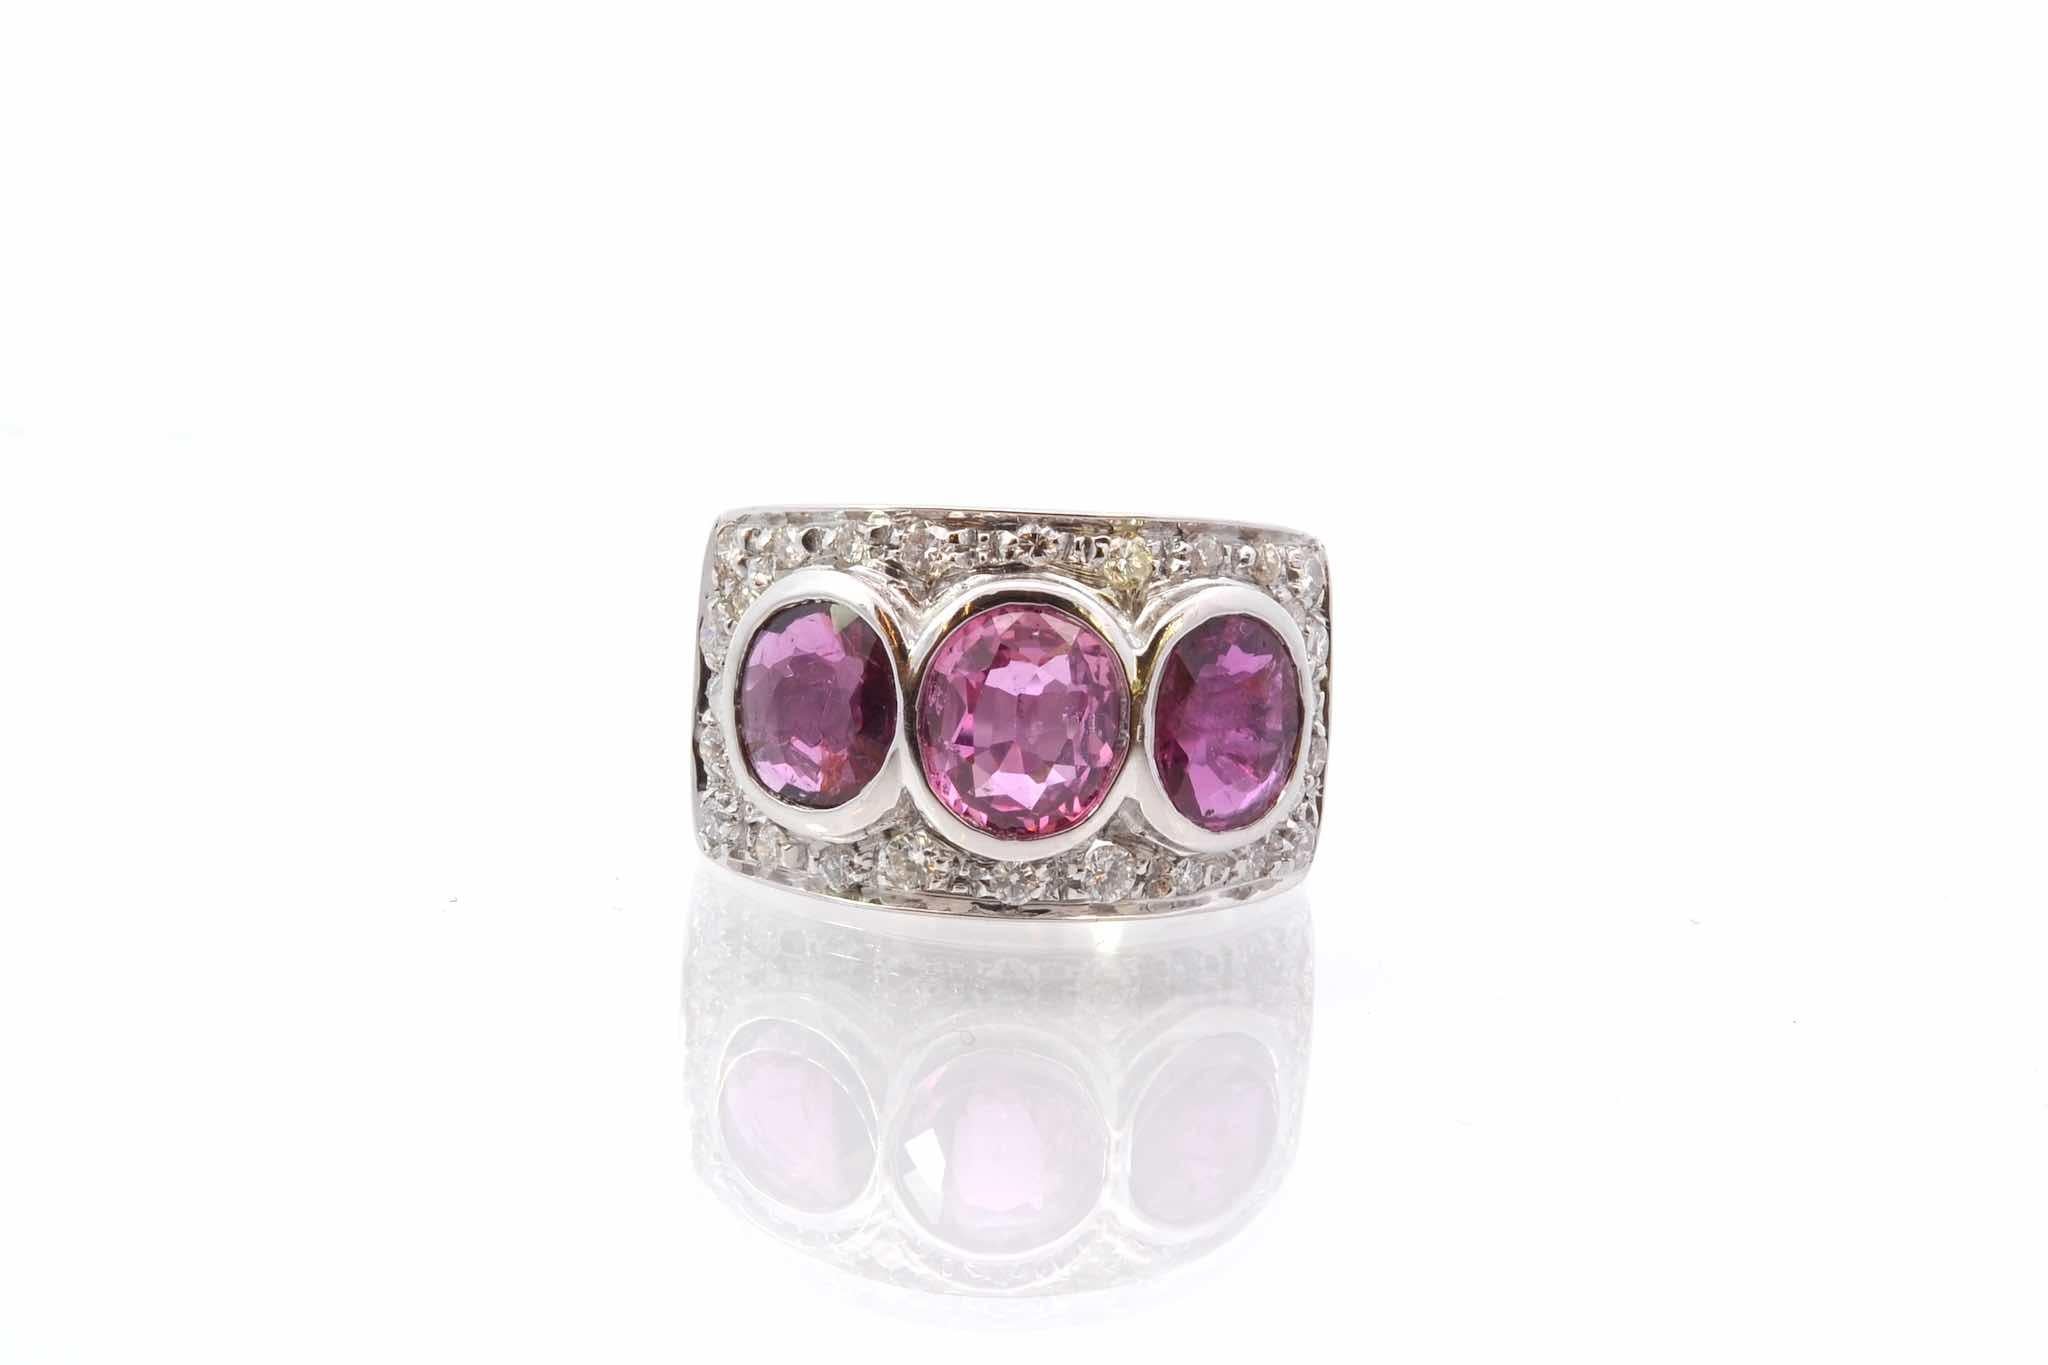 Stones: 3 sapphires: 4 cts and 28 diamonds: 0.56 ct
Material: 18k white gold
Weight: 10.2g
Period: Recent
Size: 51 (free sizing)
Certificate
Ref. : 25627